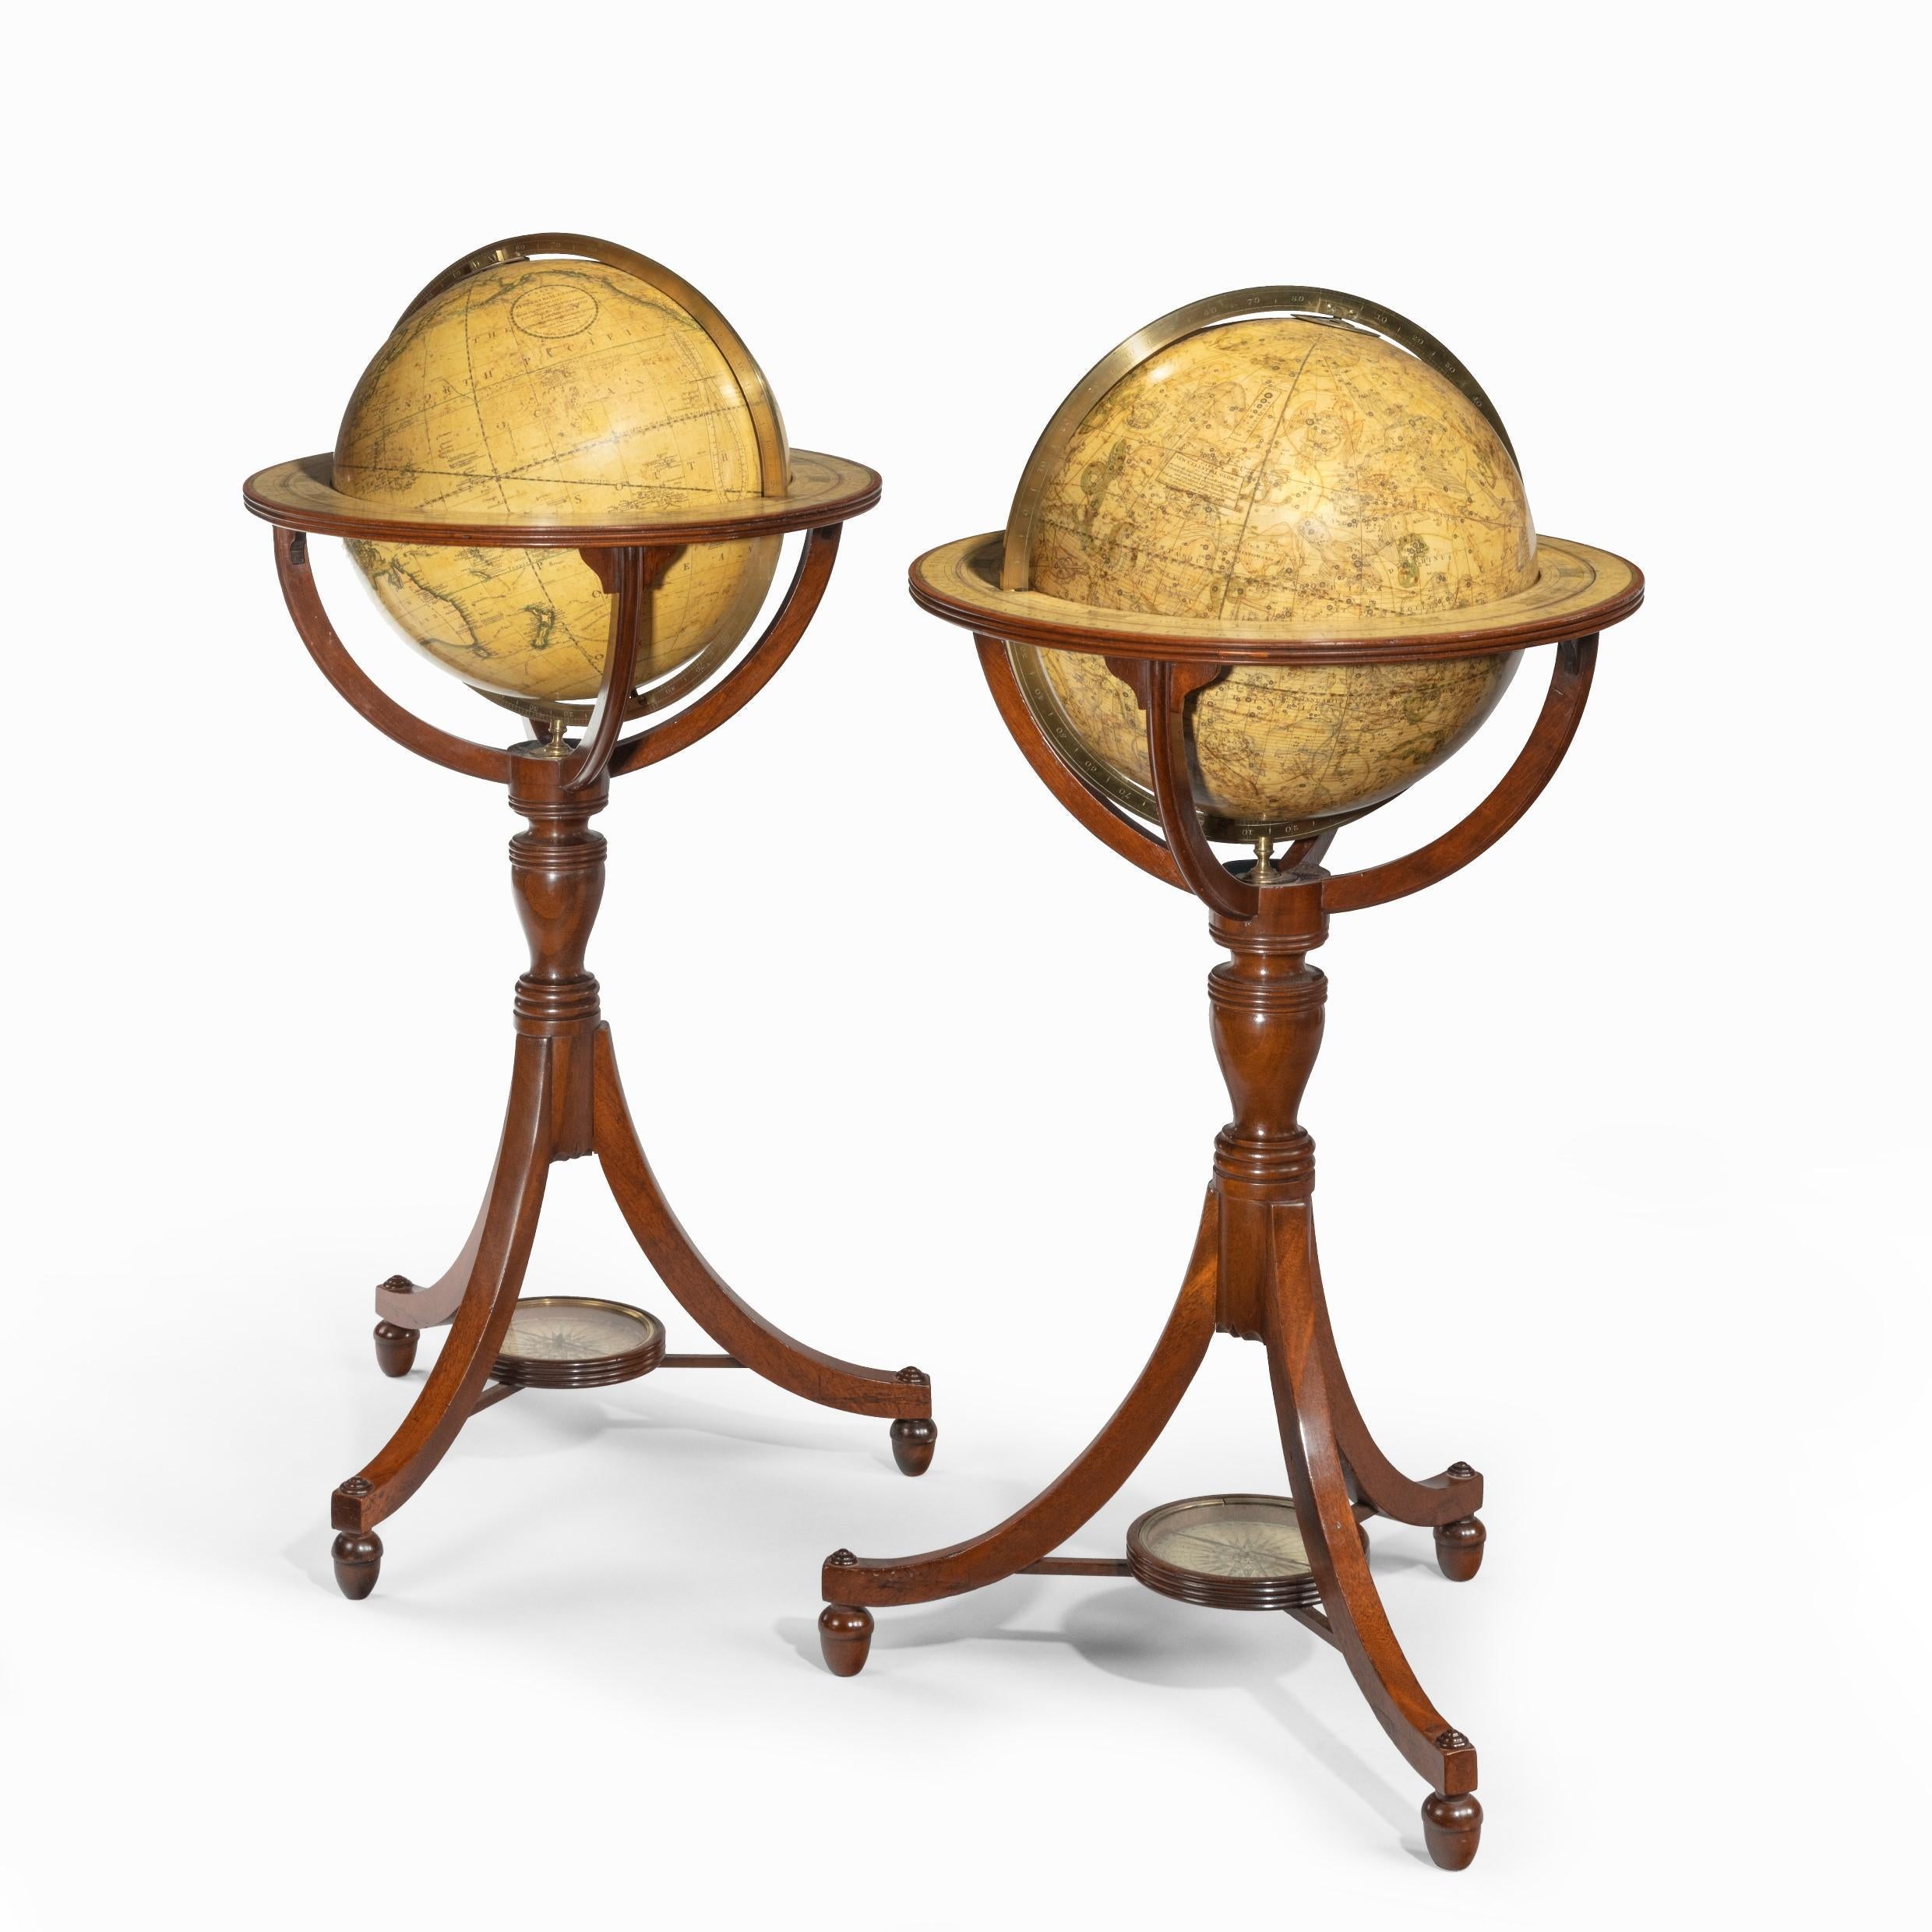 A pair of 12-inch floor globes by Cary, each set into a tripod walnut stand with a turned baluster support, outswept legs on acorn feet and stretchers centred on a replaced compass rose, the terrestrial globe stating ‘Cary’s New Terrestrial Globe